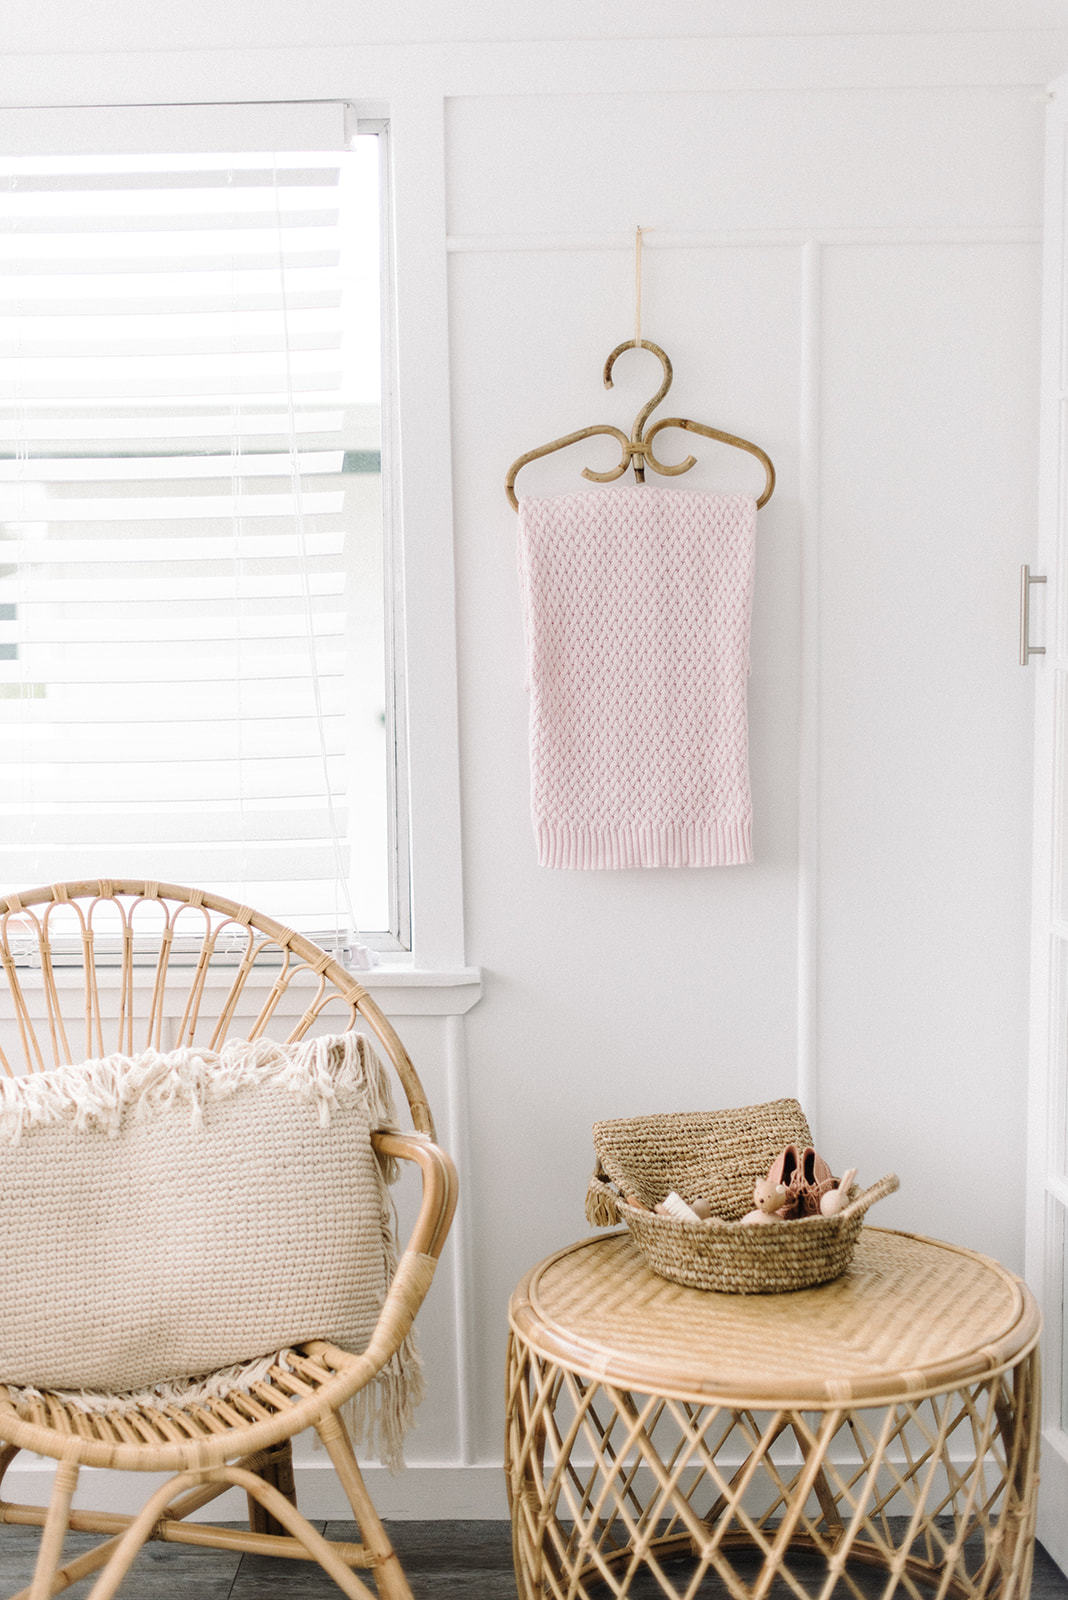 Blush pink diamond knit baby blanket from Snuggle Hunny Kids is now available on Sugarbird Kids.